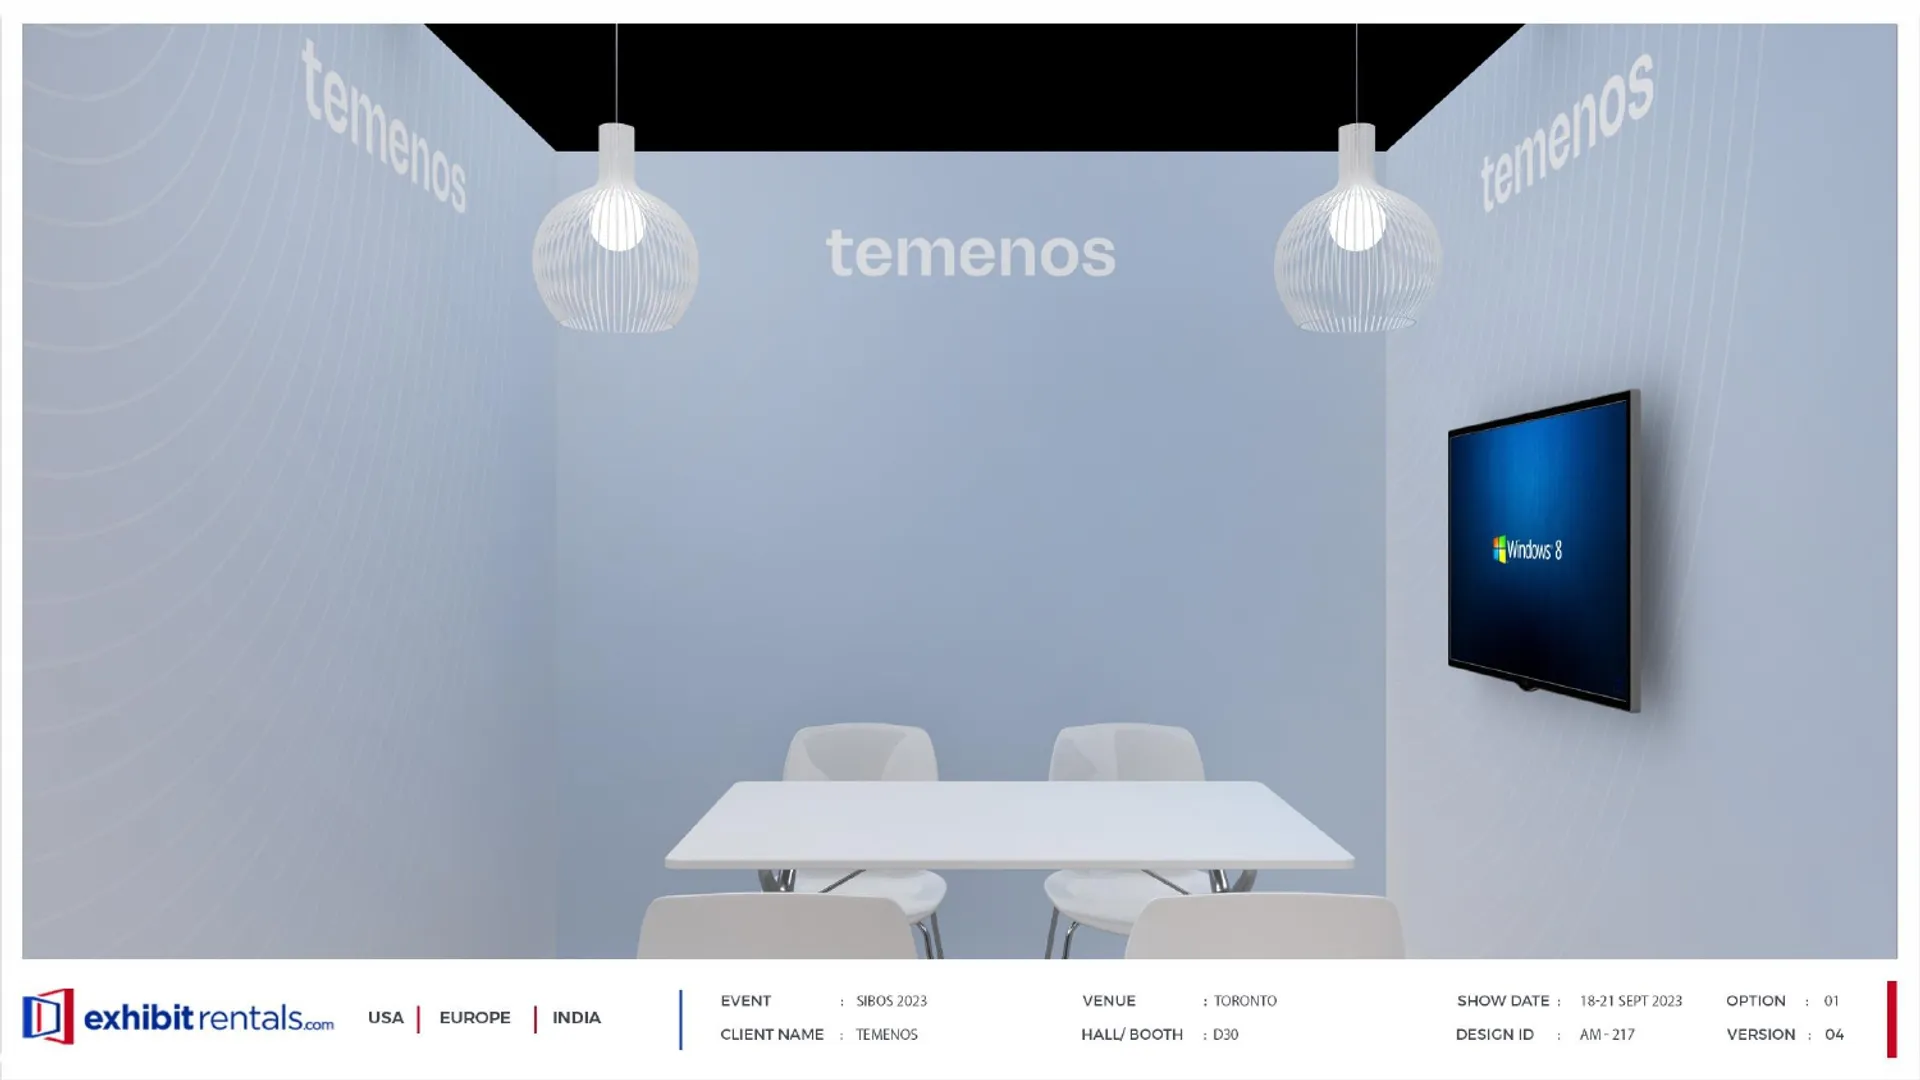 booth-design-projects/Exhibit-Rentals/2024-04-17-20x20-PENINSULA-Project-107/1.4 - Temenos - ER Design Presentation.pptx-18_page-0001-s9a83.jpg